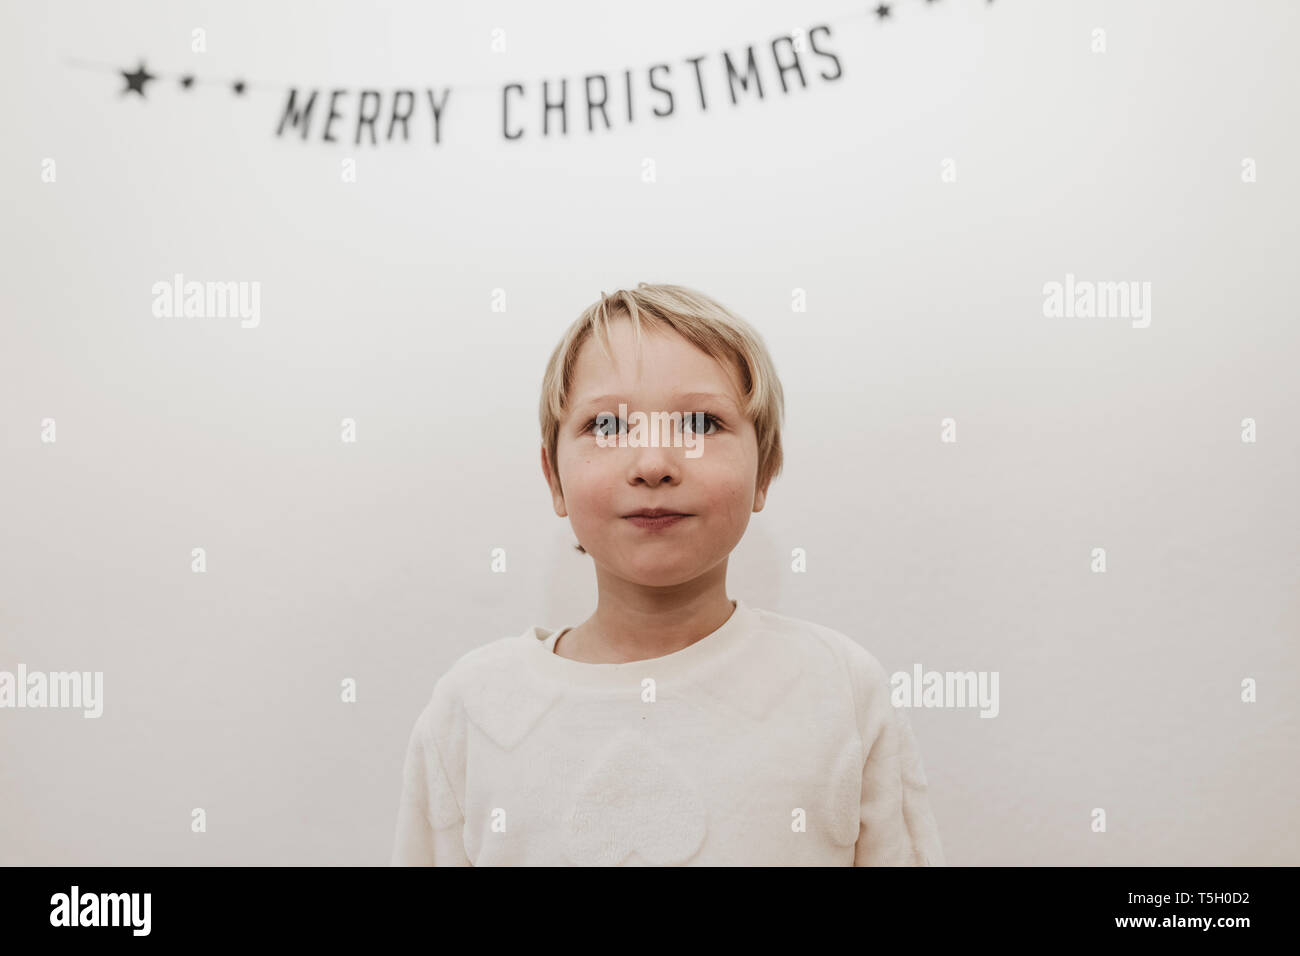 Blonde boy looking forward to Christmas Stock Photo